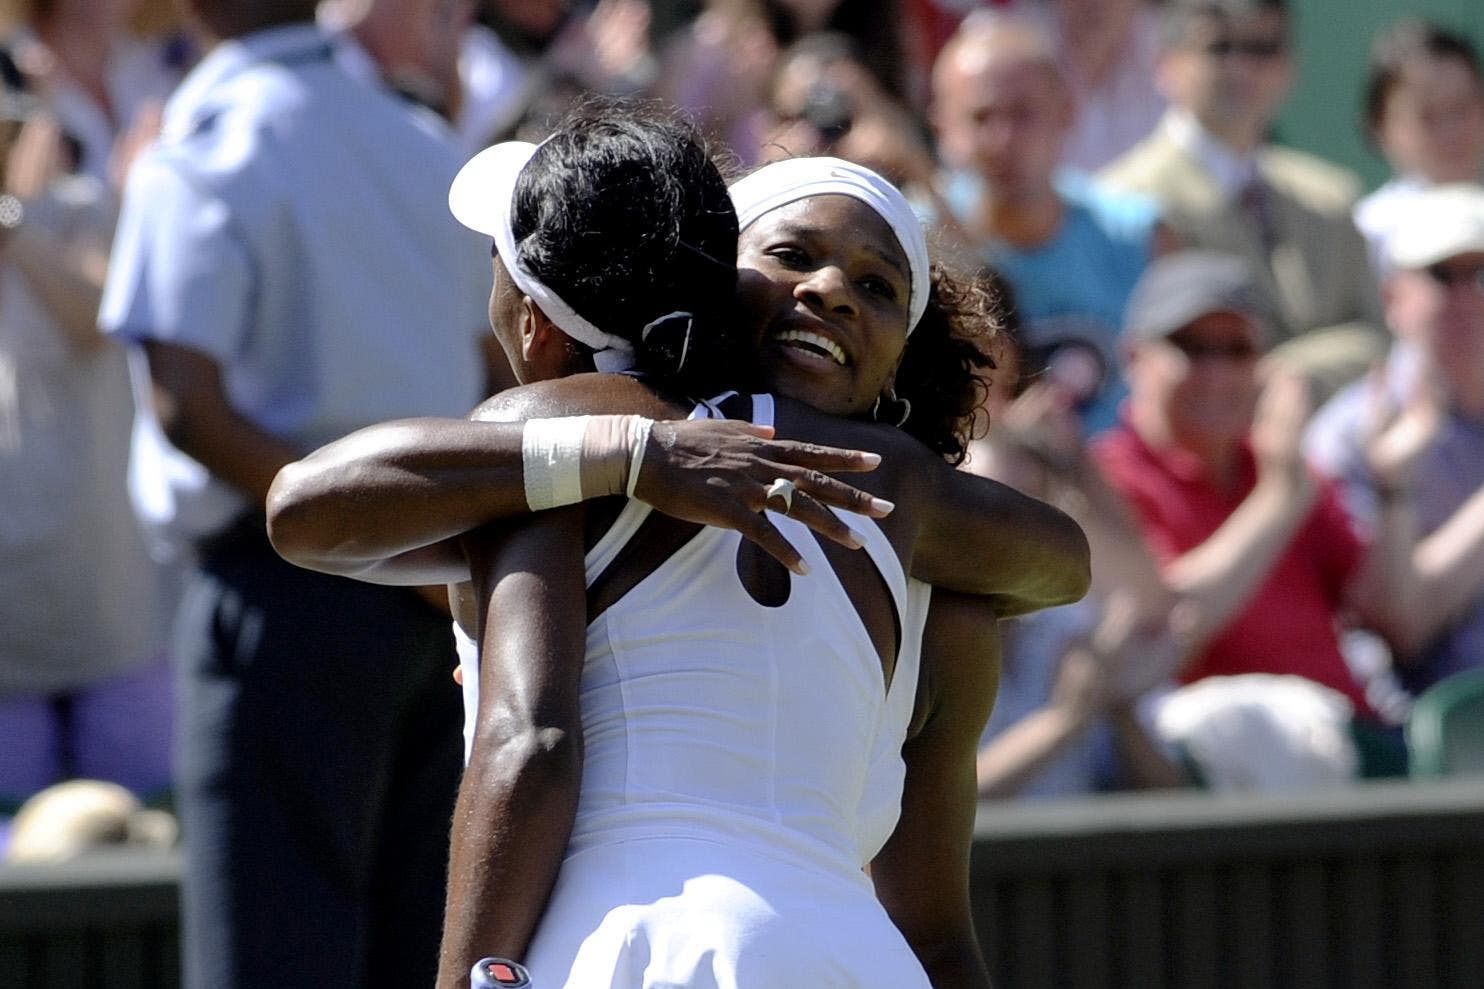 Serena Williams beat sister Venus in 2009 in what was the fourth Wimbledon final meeting between the pair (Rebecca Naden/PA)